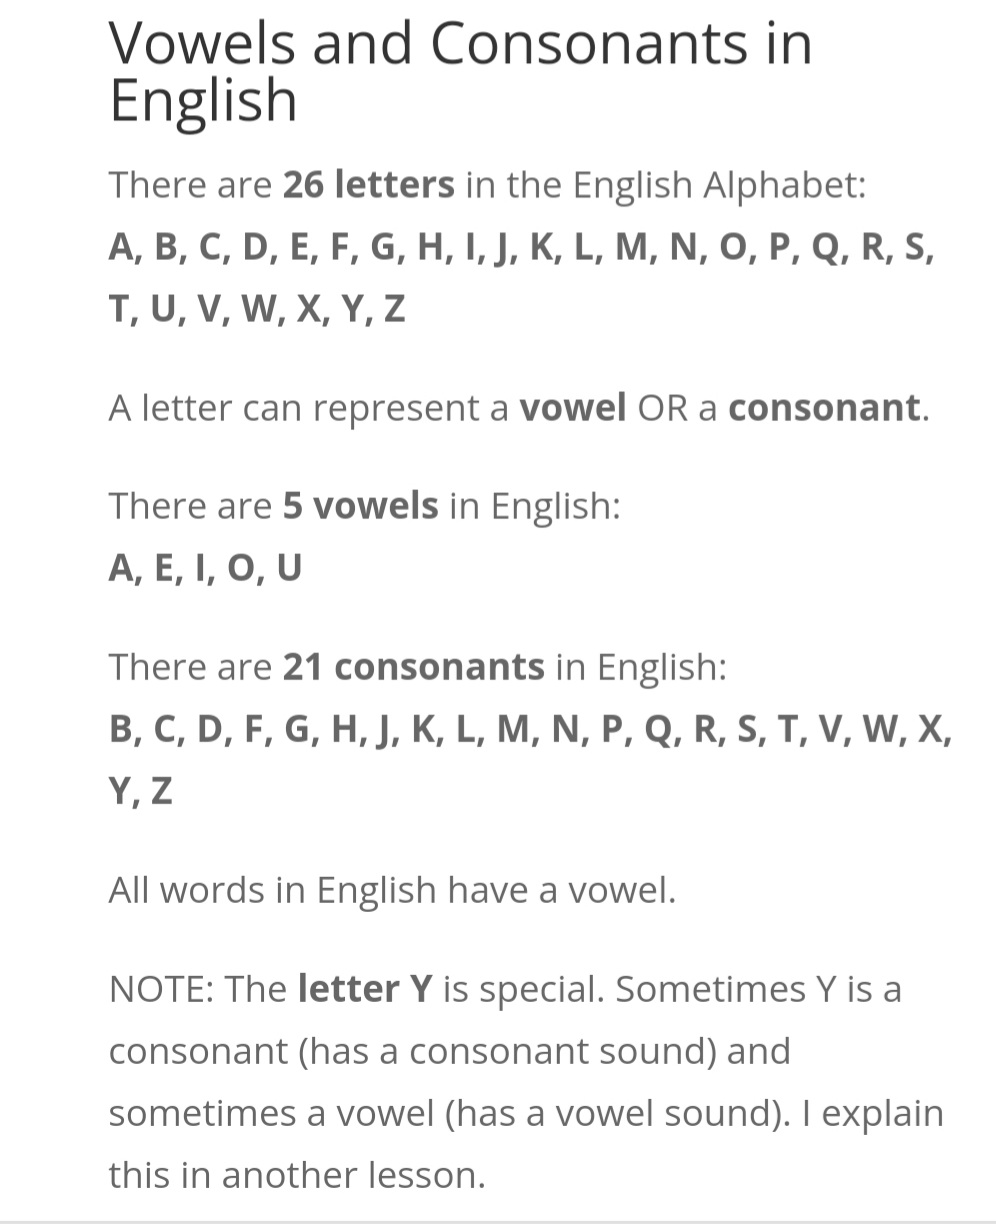 vowels and consonants in english